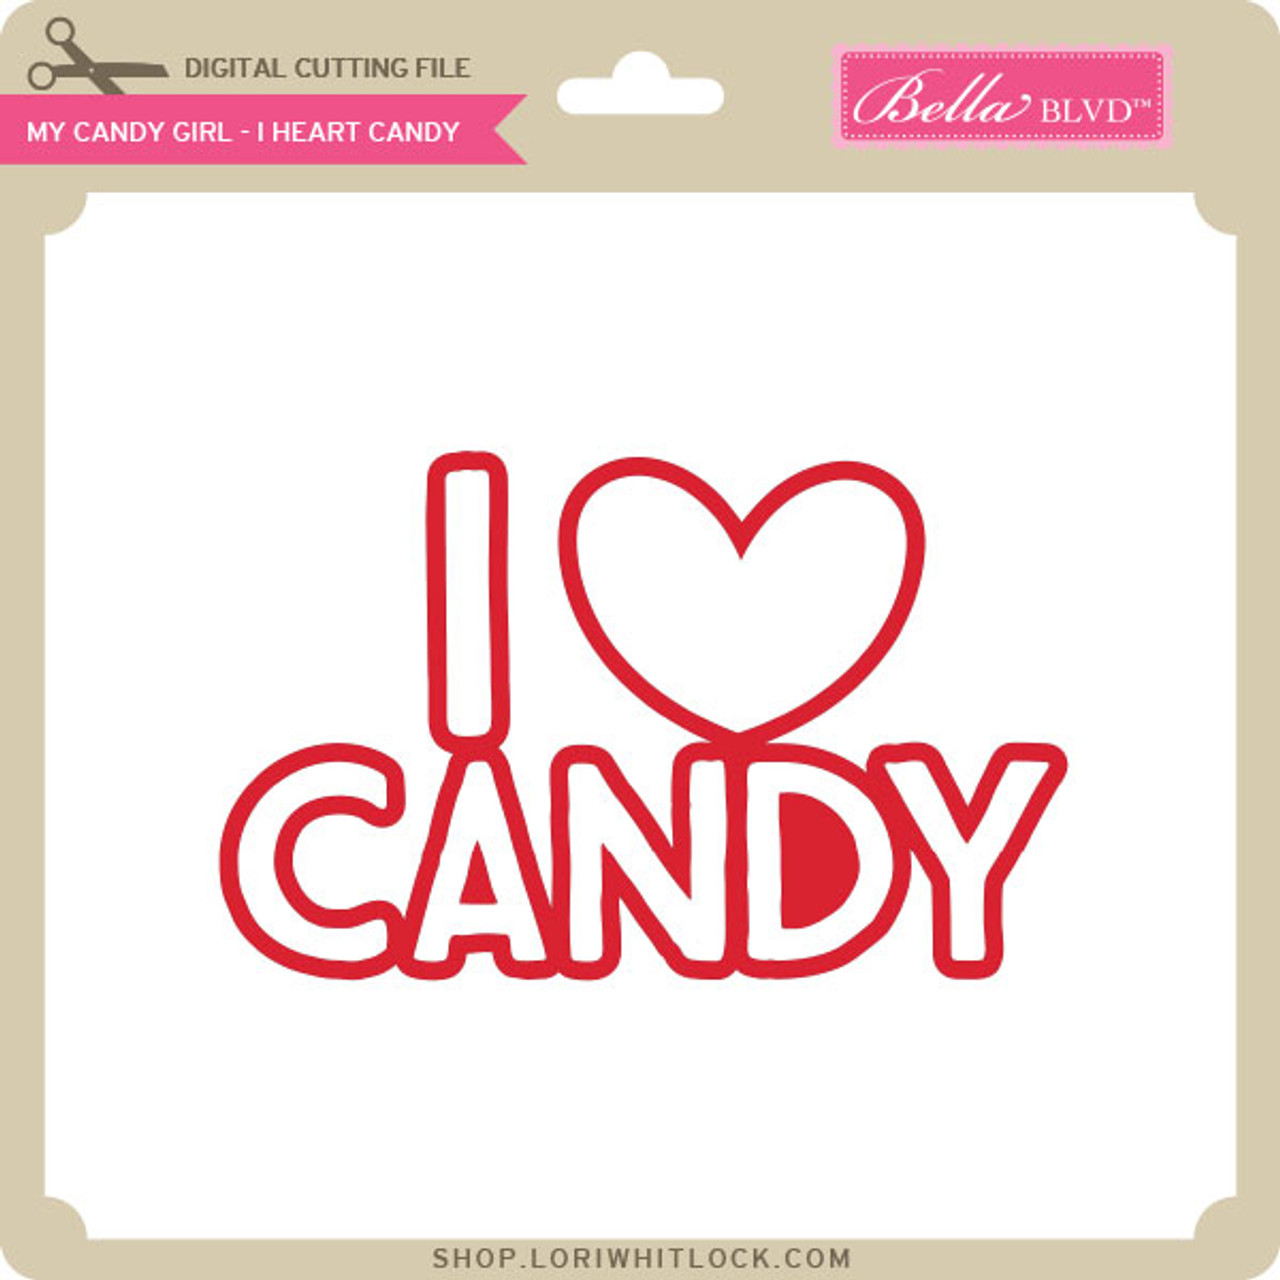 Candy Girl Shop Wholesale Price